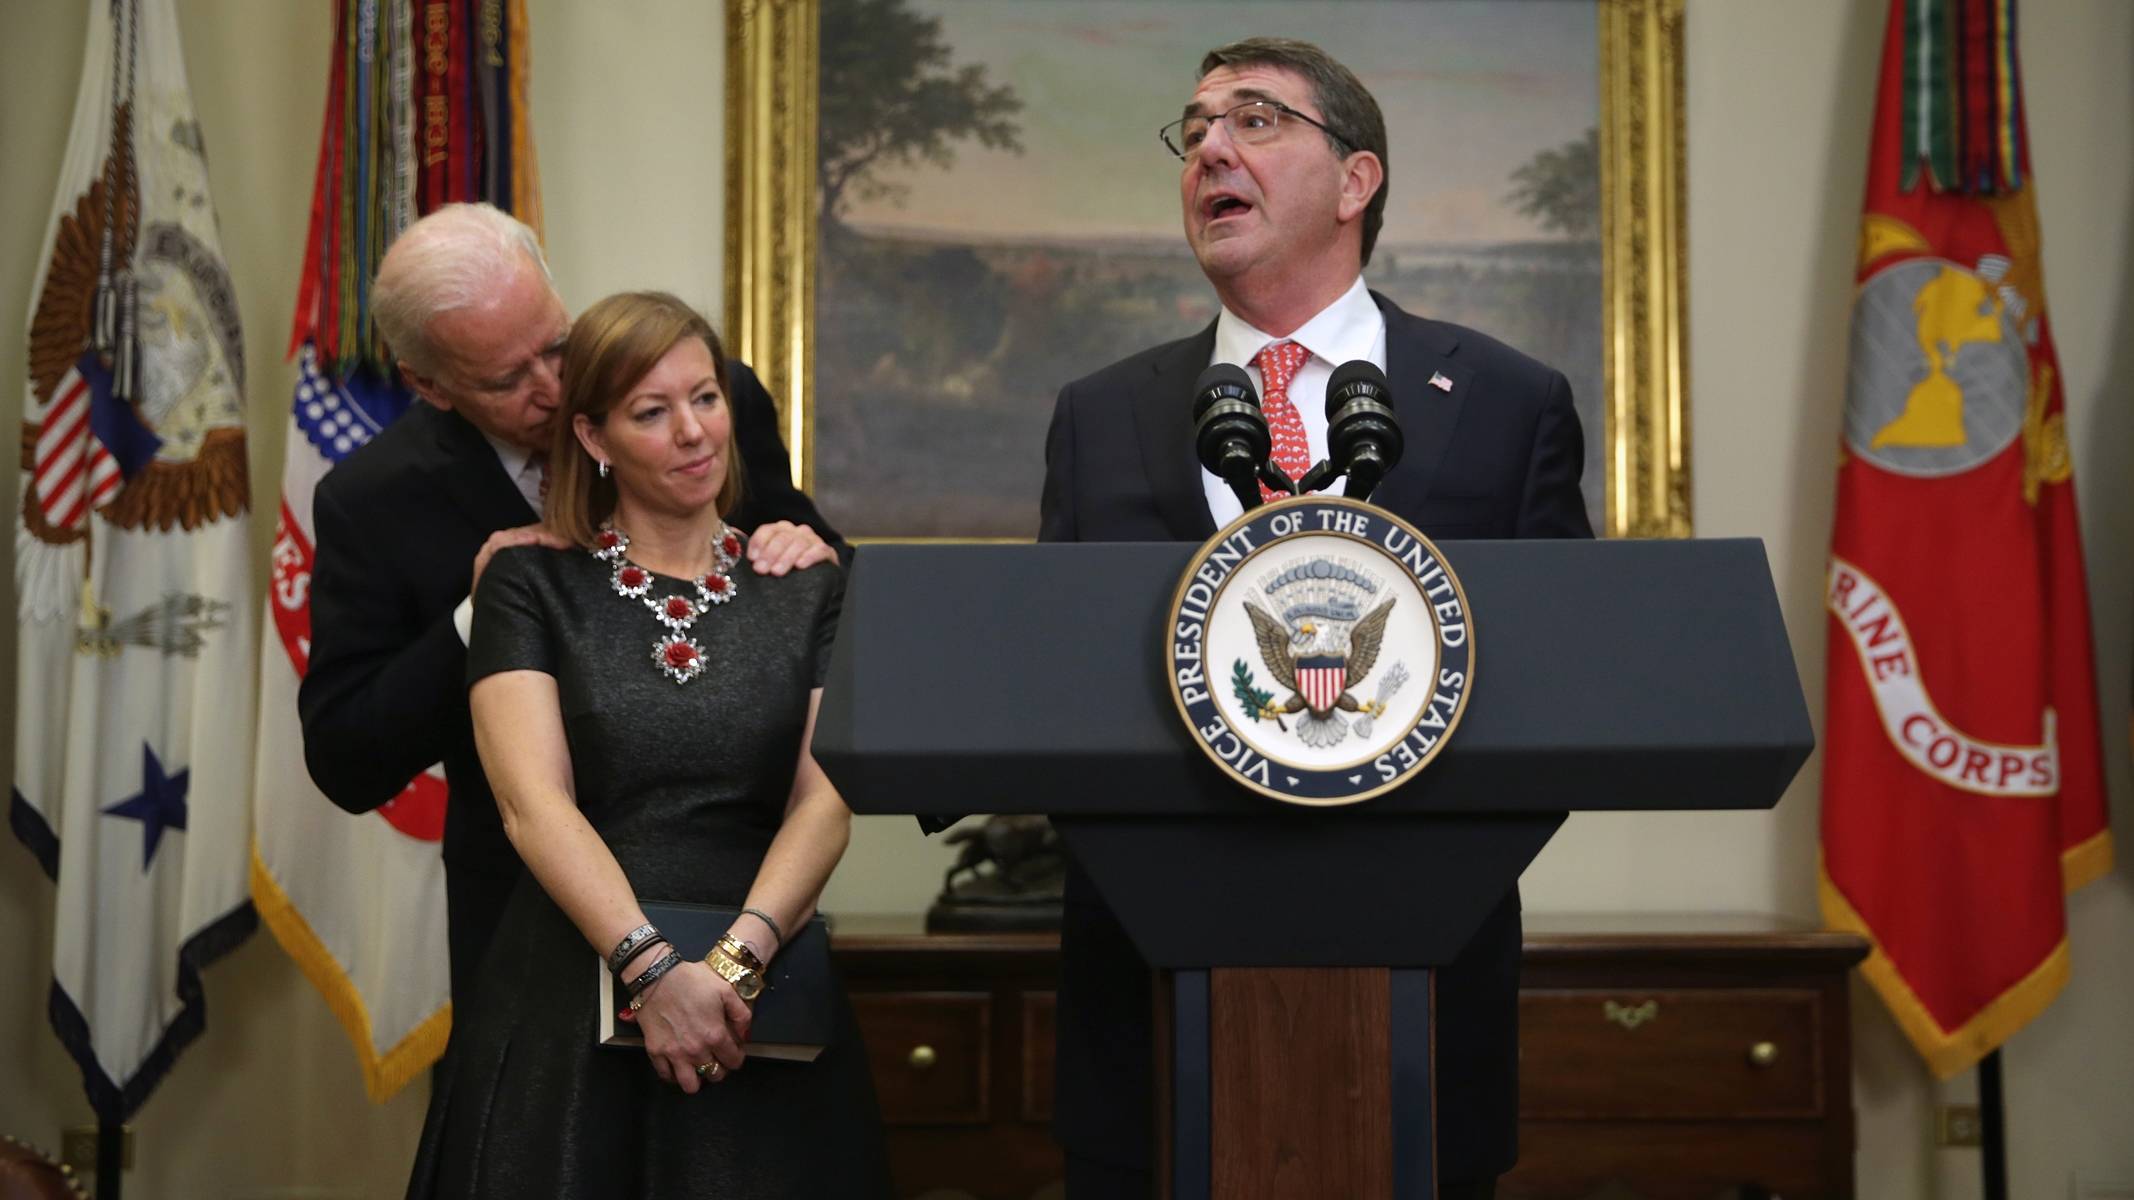 The 10 Worst Things Joe Biden Has Done in His Political Career